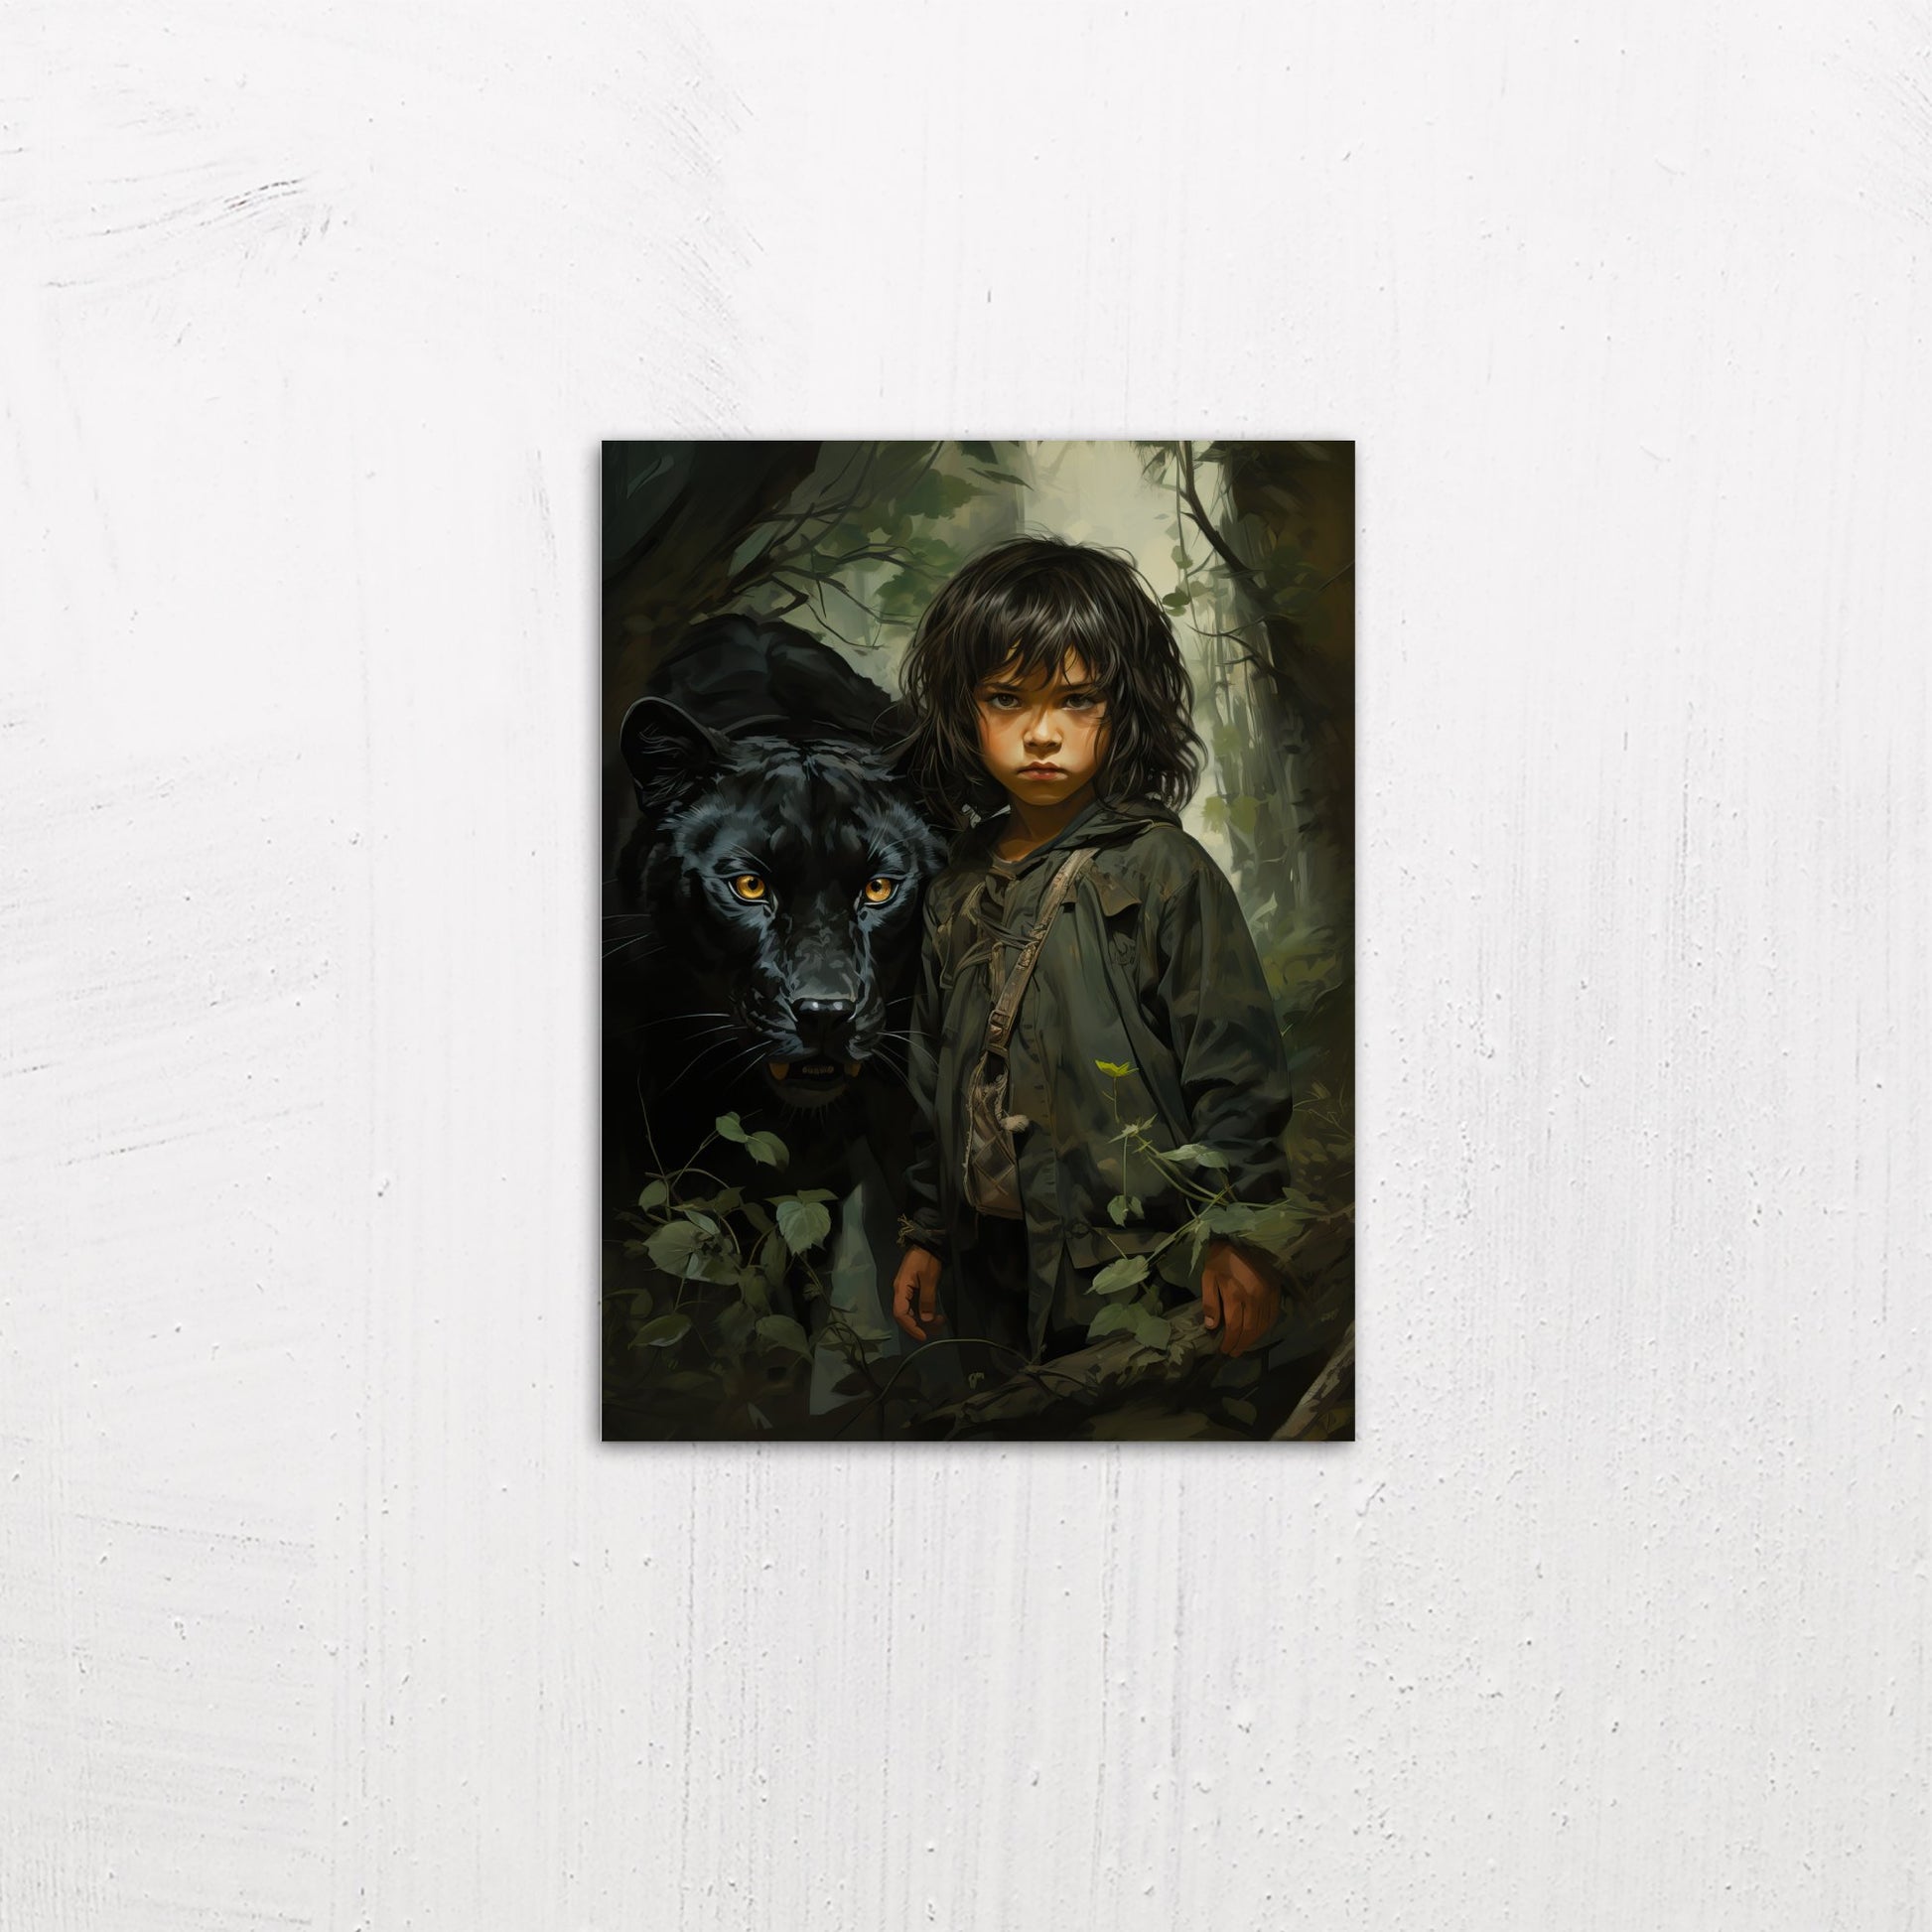 A small size metal art poster display plate with printed design of a Boy and Black Panther Fantasy Painting